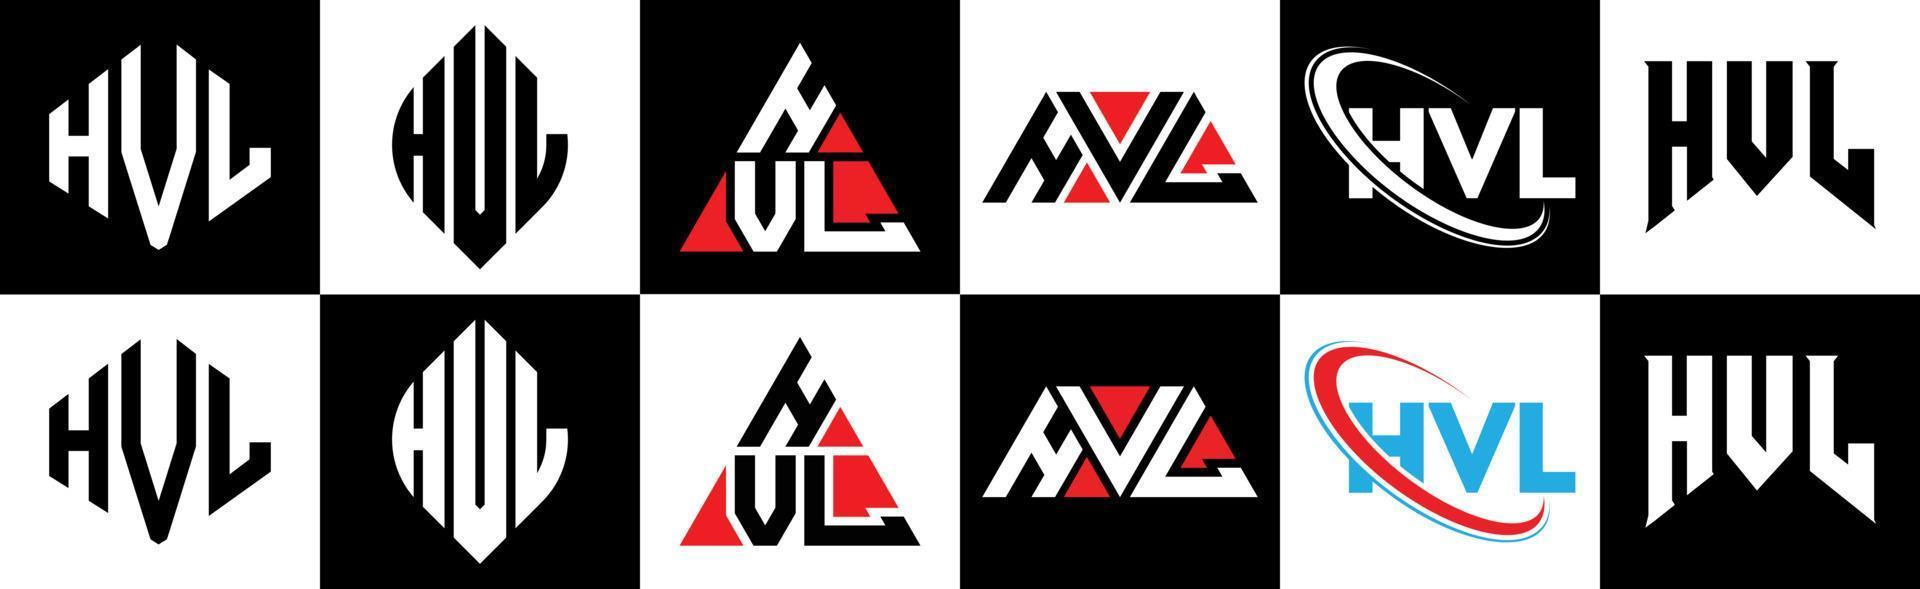 HVL letter logo design in six style. HVL polygon, circle, triangle, hexagon, flat and simple style with black and white color variation letter logo set in one artboard. HVL minimalist and classic logo vector